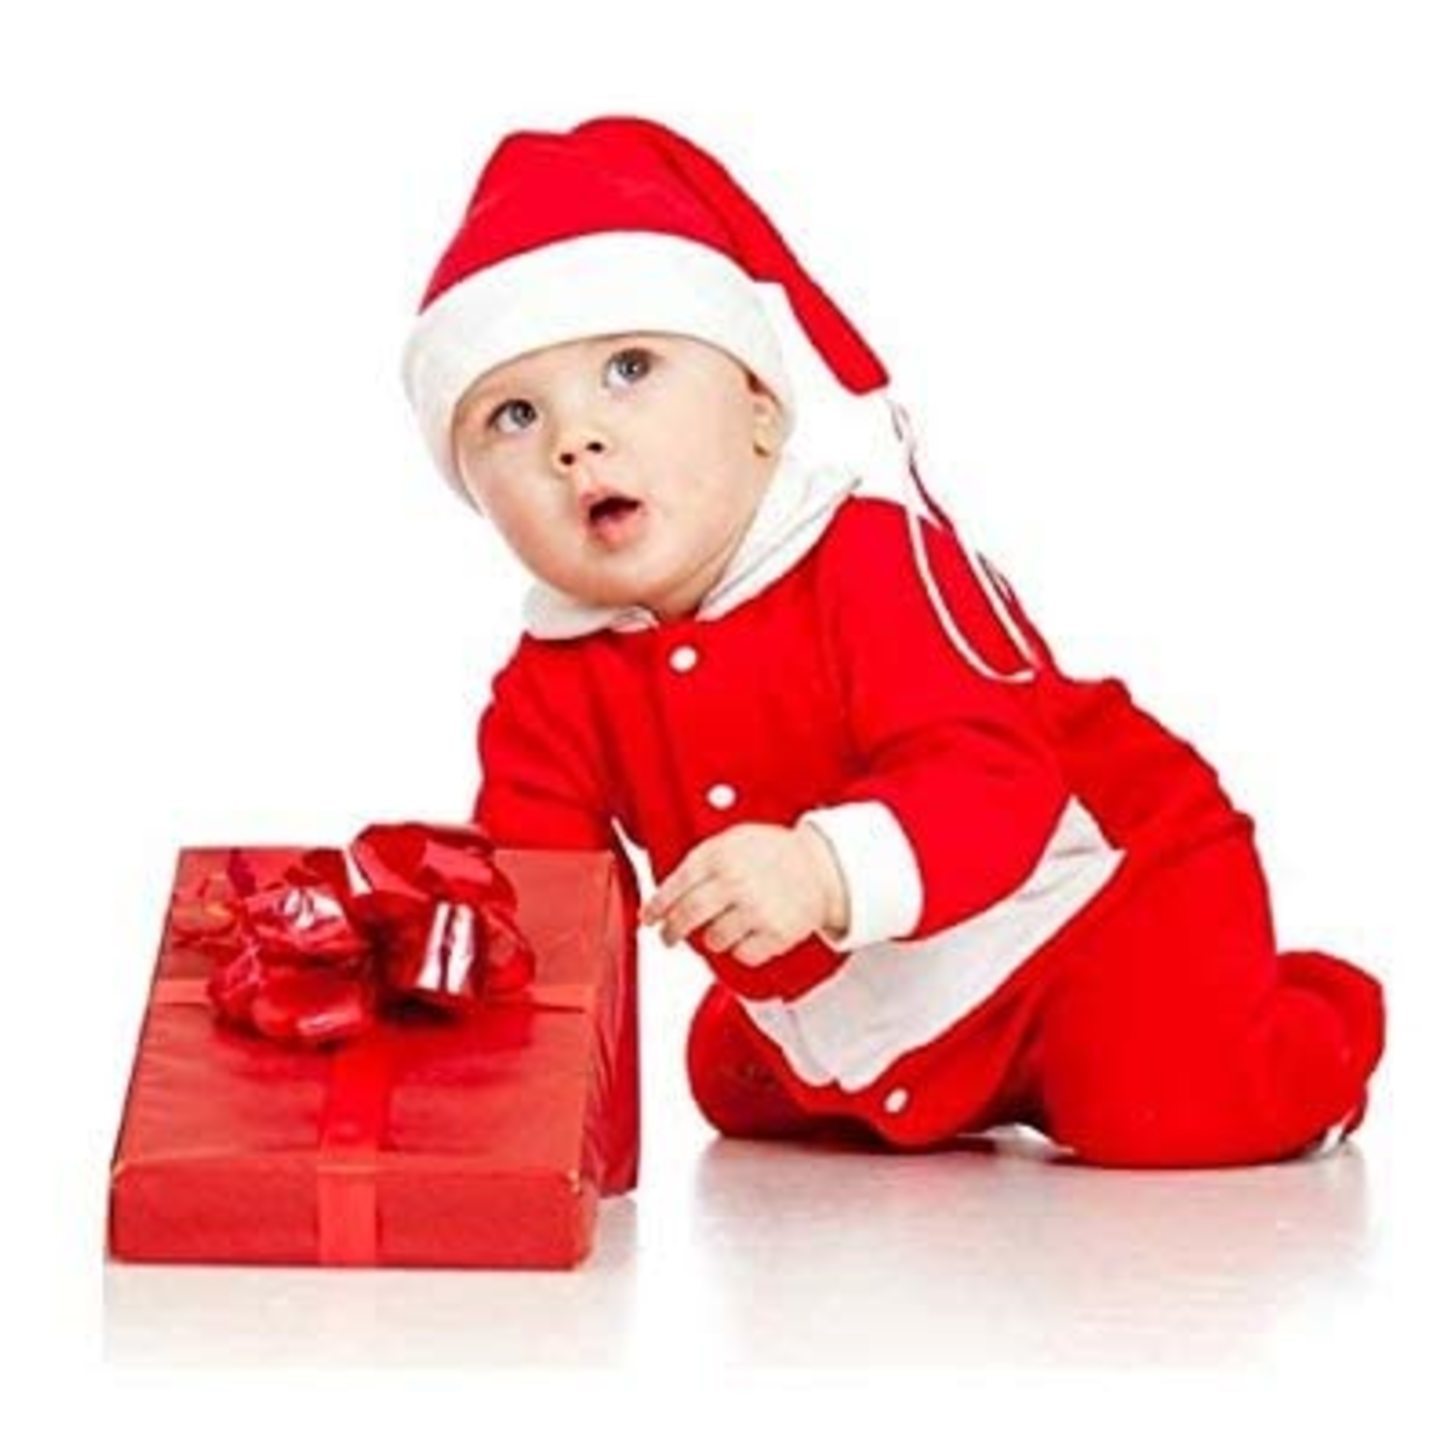 4 Piece Santa Claus Costume for kids 6 months to 2 years